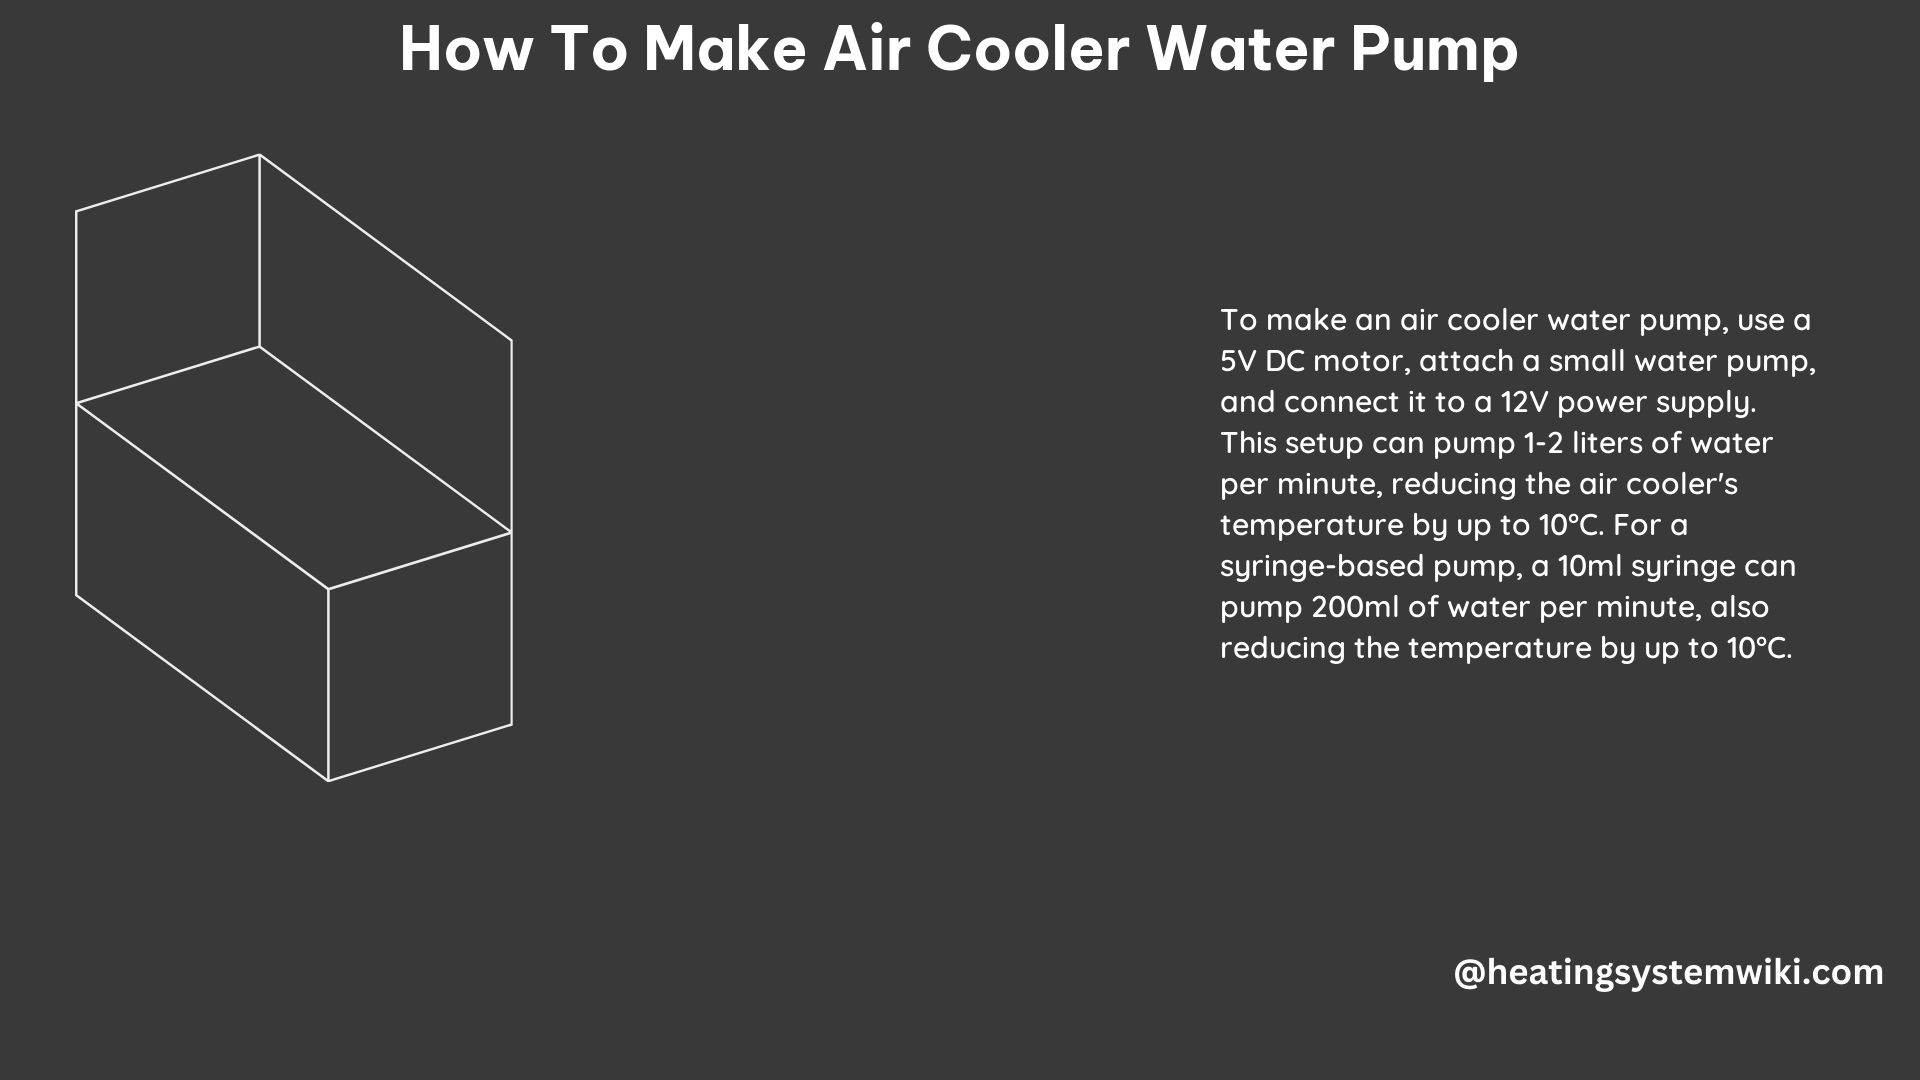 How to Make Air Cooler Water Pump